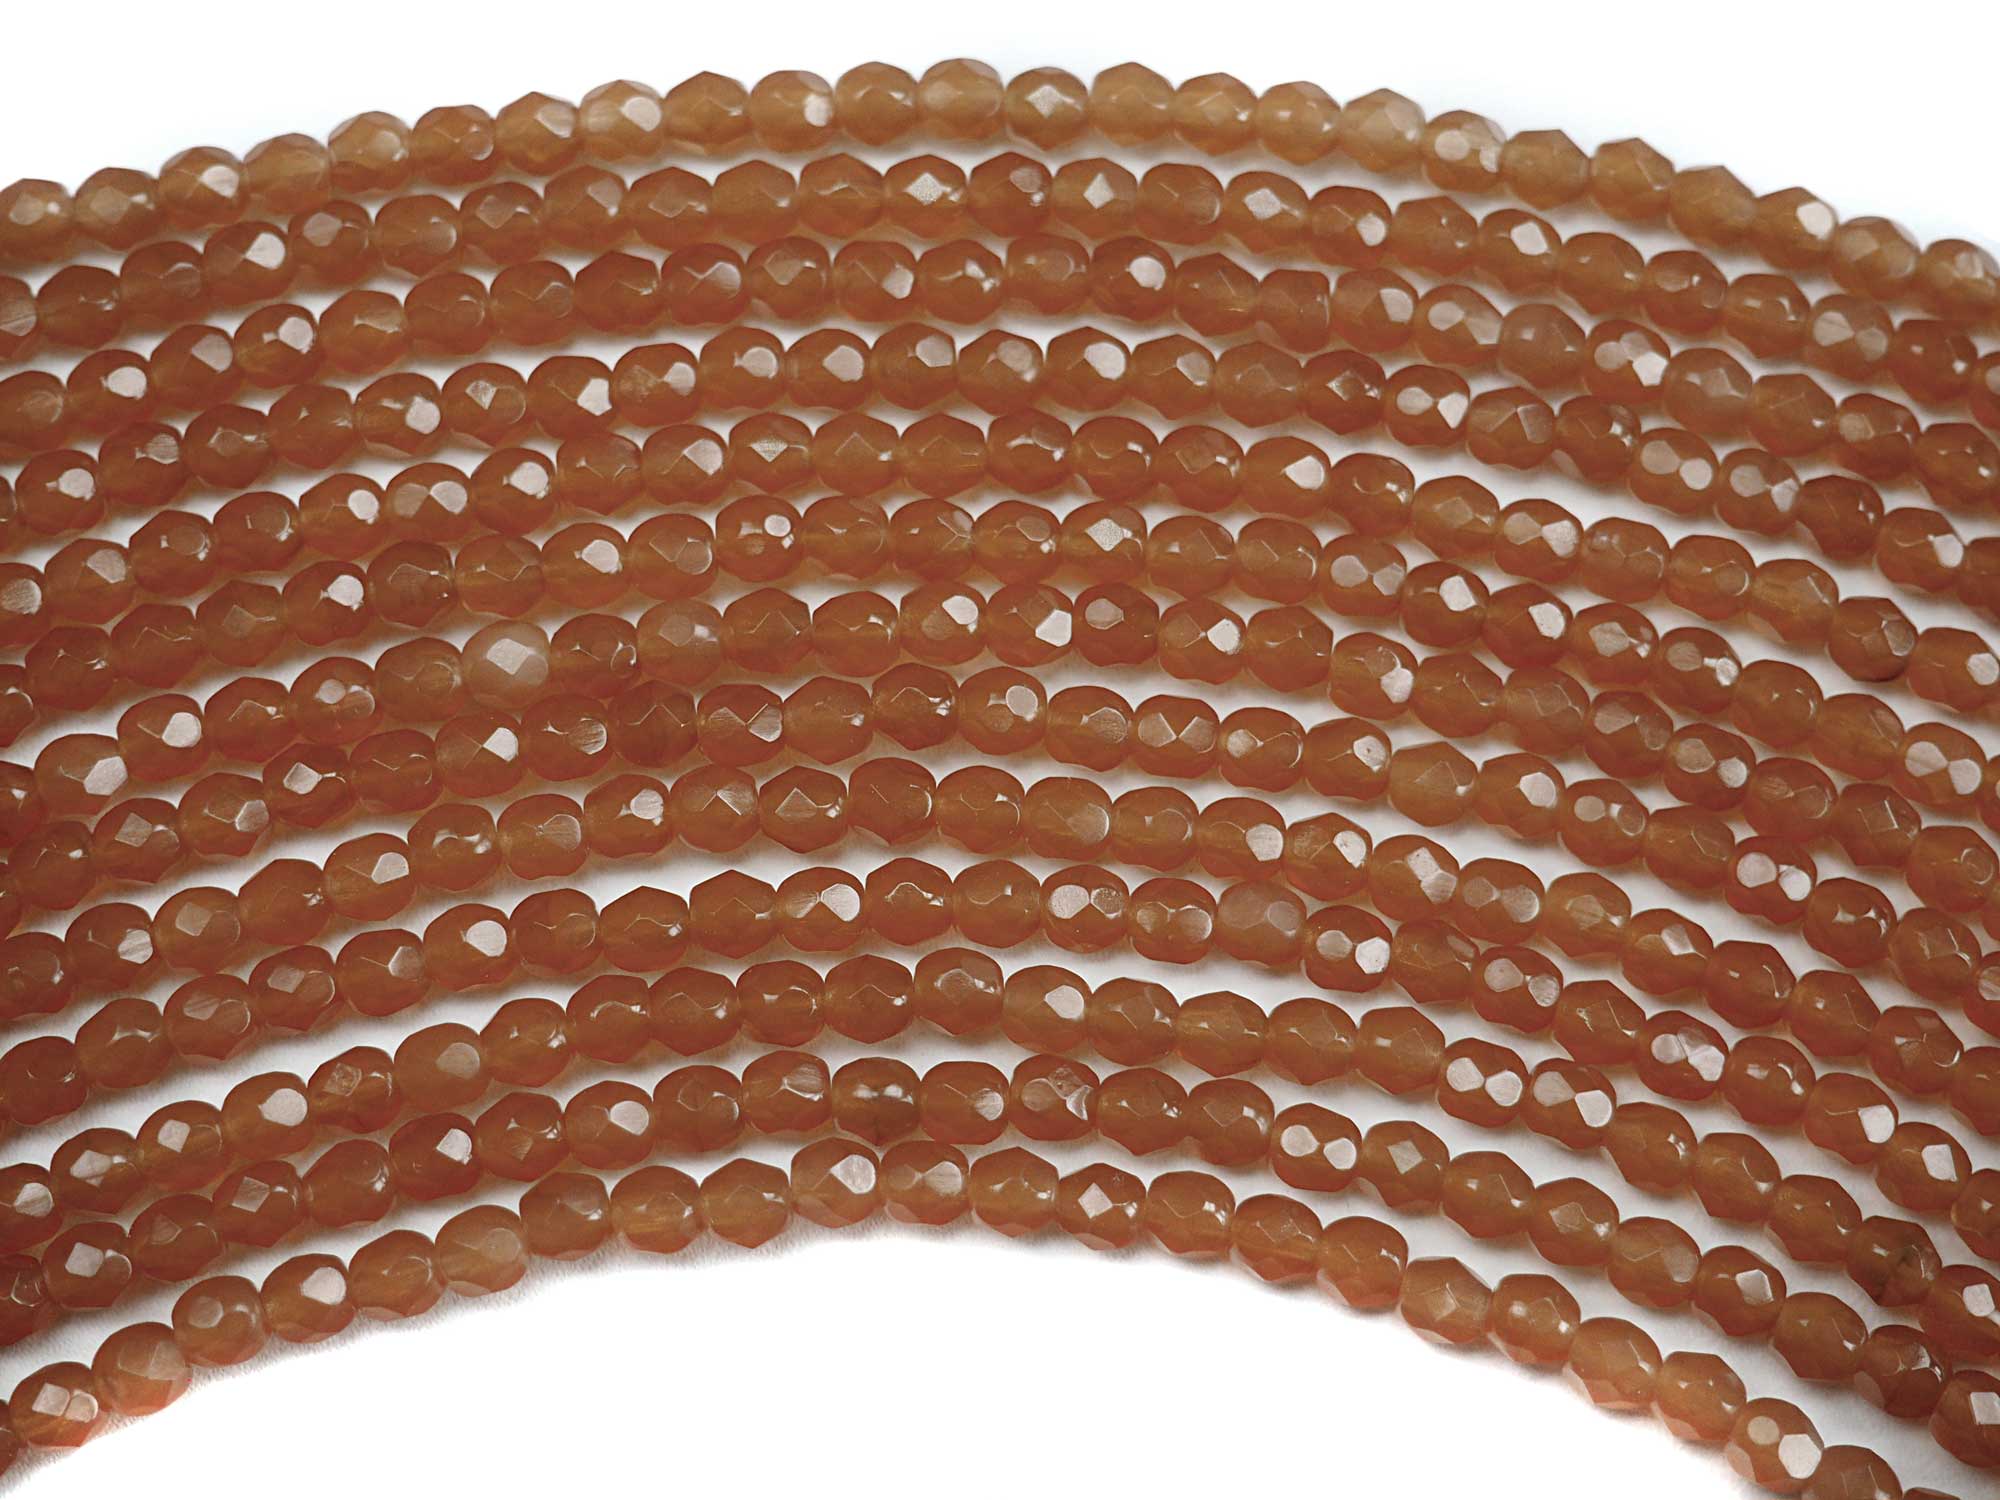 Topaz Opal, Czech Fire Polished Round Faceted Glass Beads, 16 inch strand, 4mm, 102 beads, milky brown